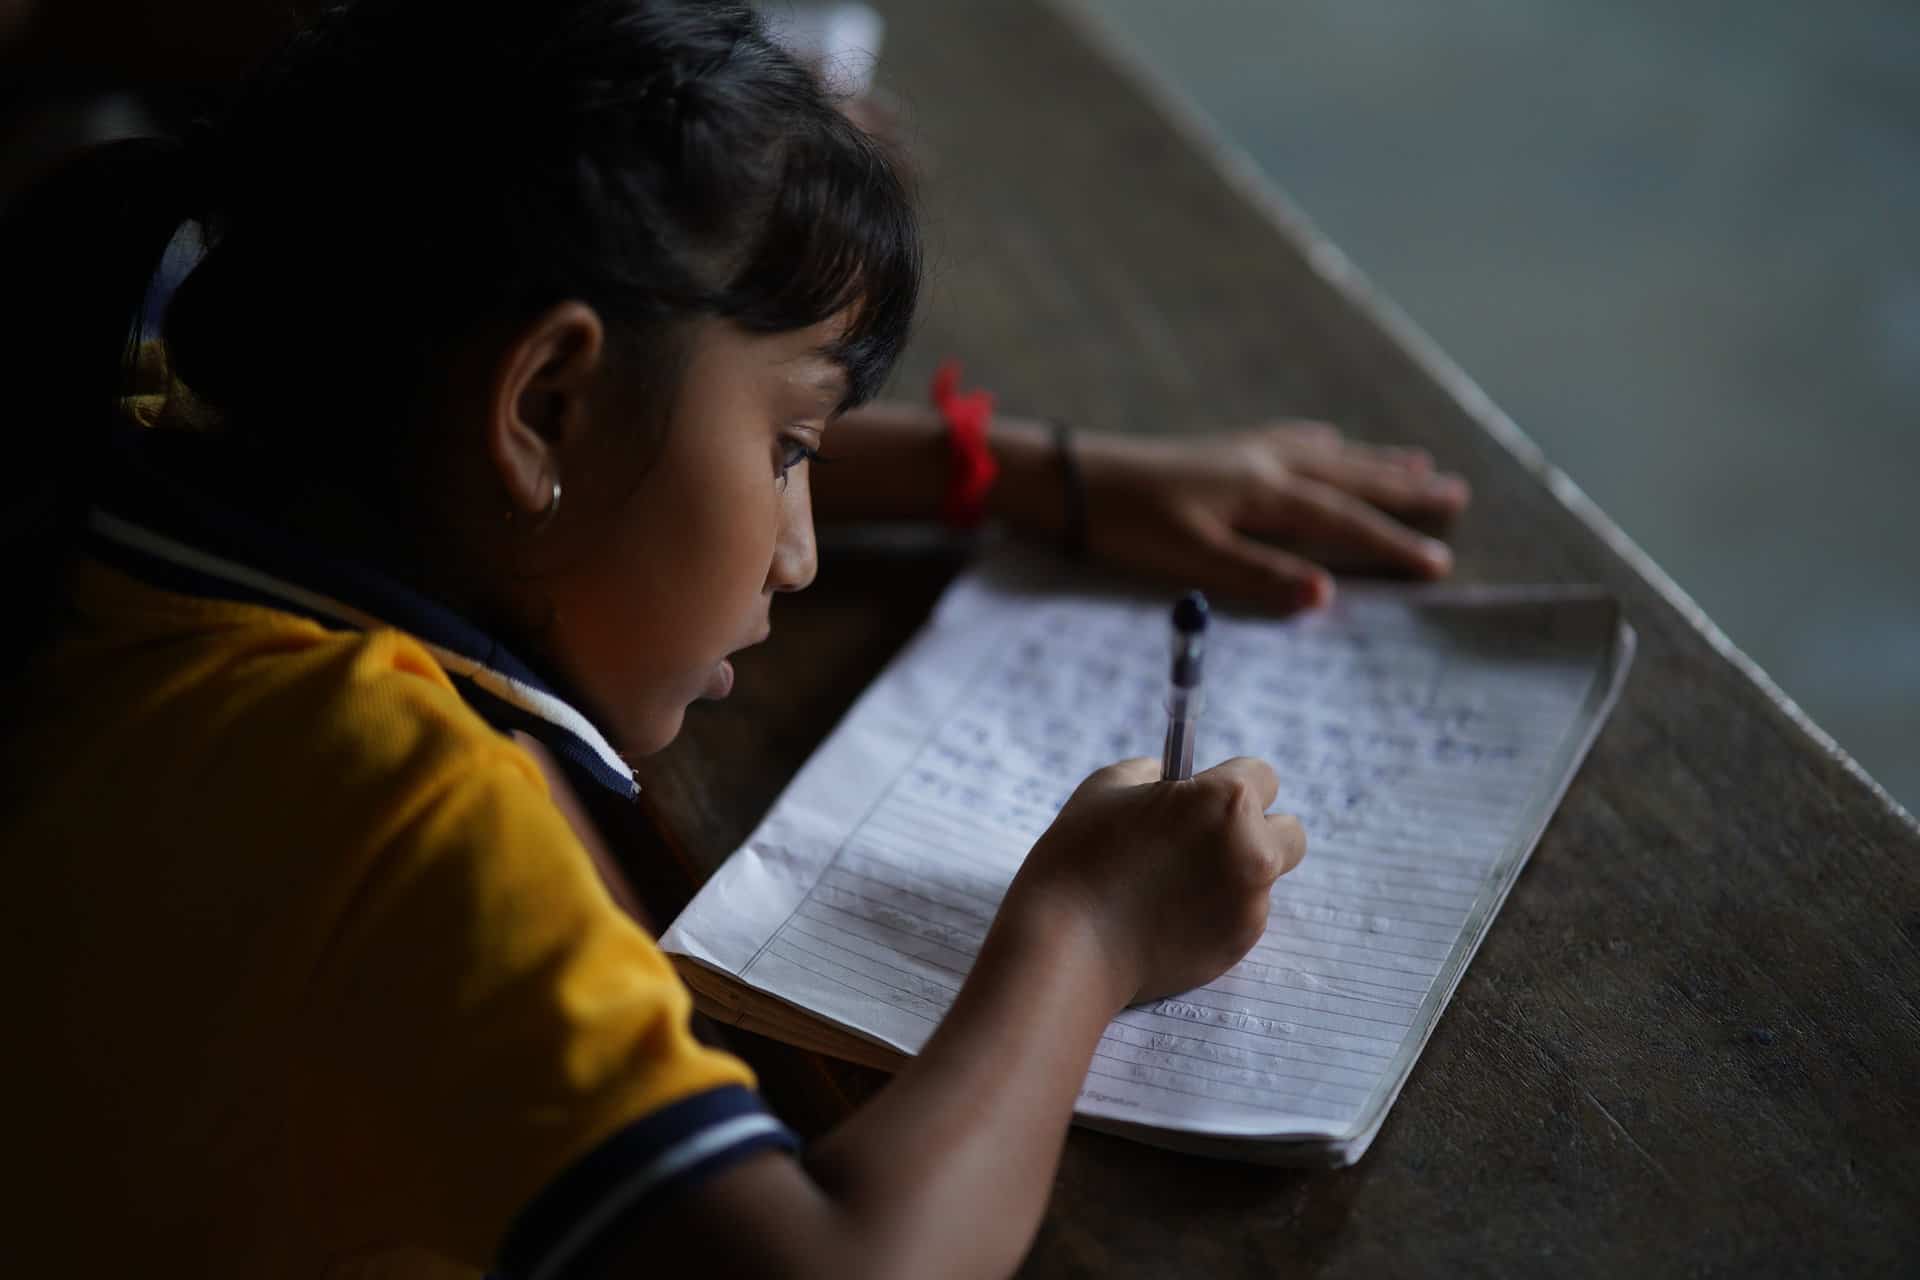 Start of a catch-up activity following learning losses caused by prolonged school closures. India was one of the countries with the longest period of school closure (almost 18 months) due to the COVID-19 pandemic. State of Assam, India, October 2022. Gilles Oger